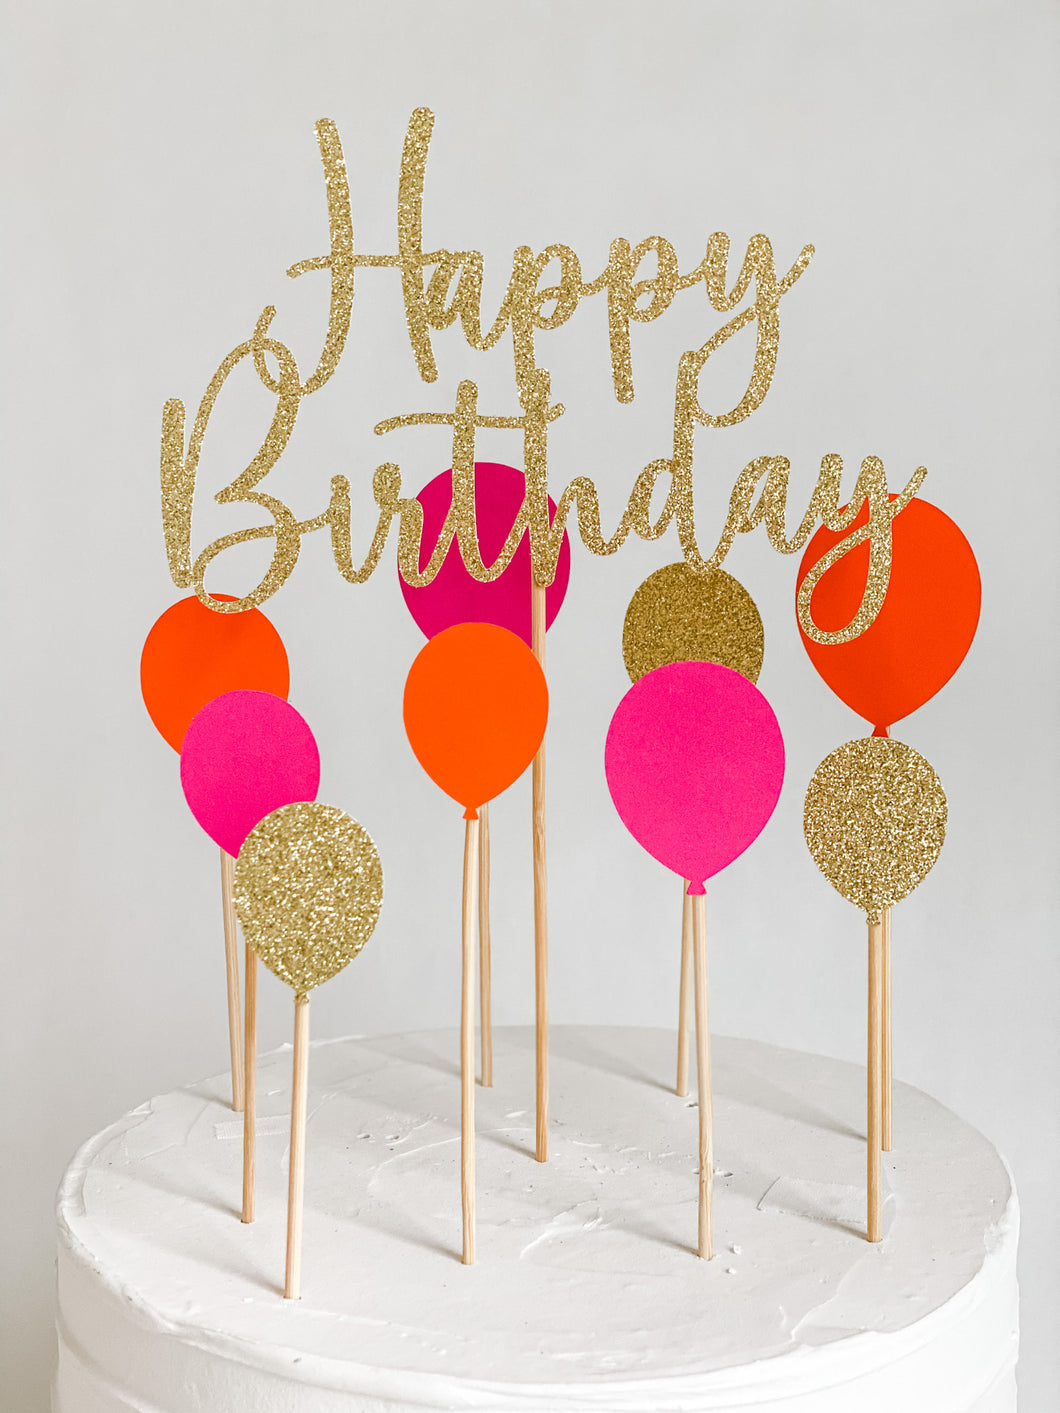 Mini Balloon Cake Topper | Made by Enchanted Balloons